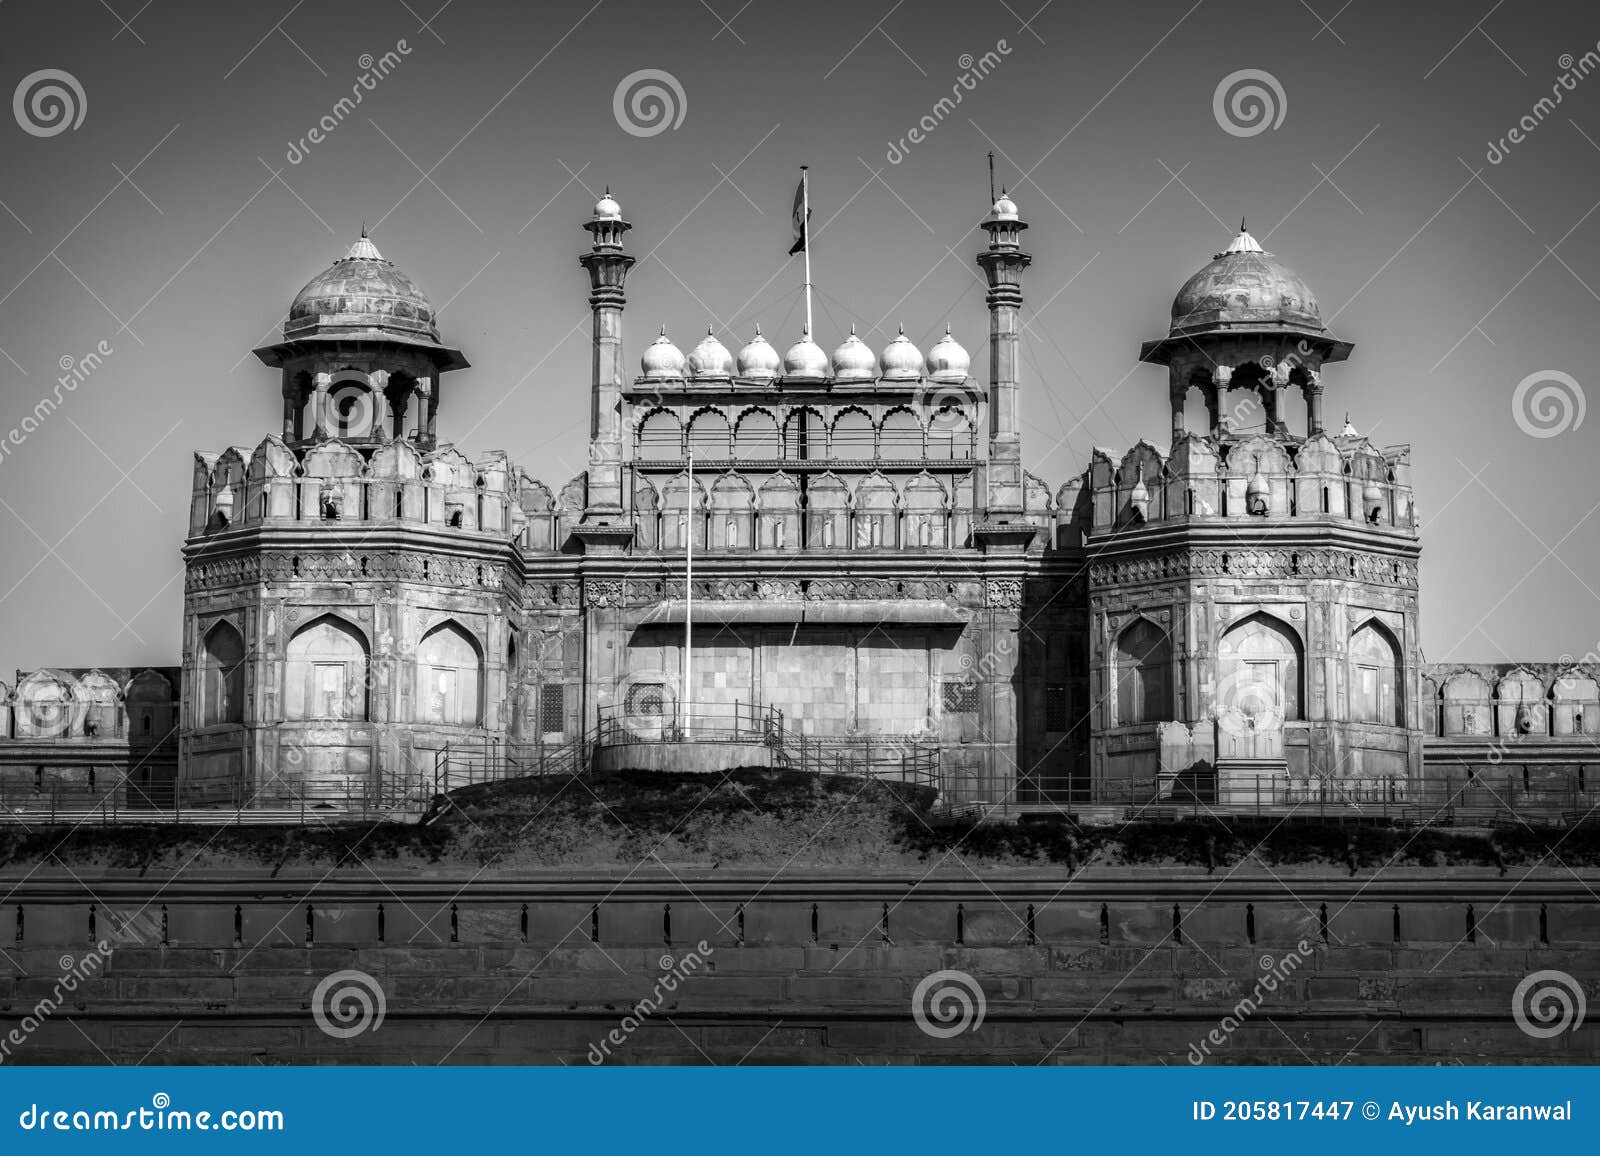 Black and White Shot of a Fort Stock Image - Image of endless, artwork ...